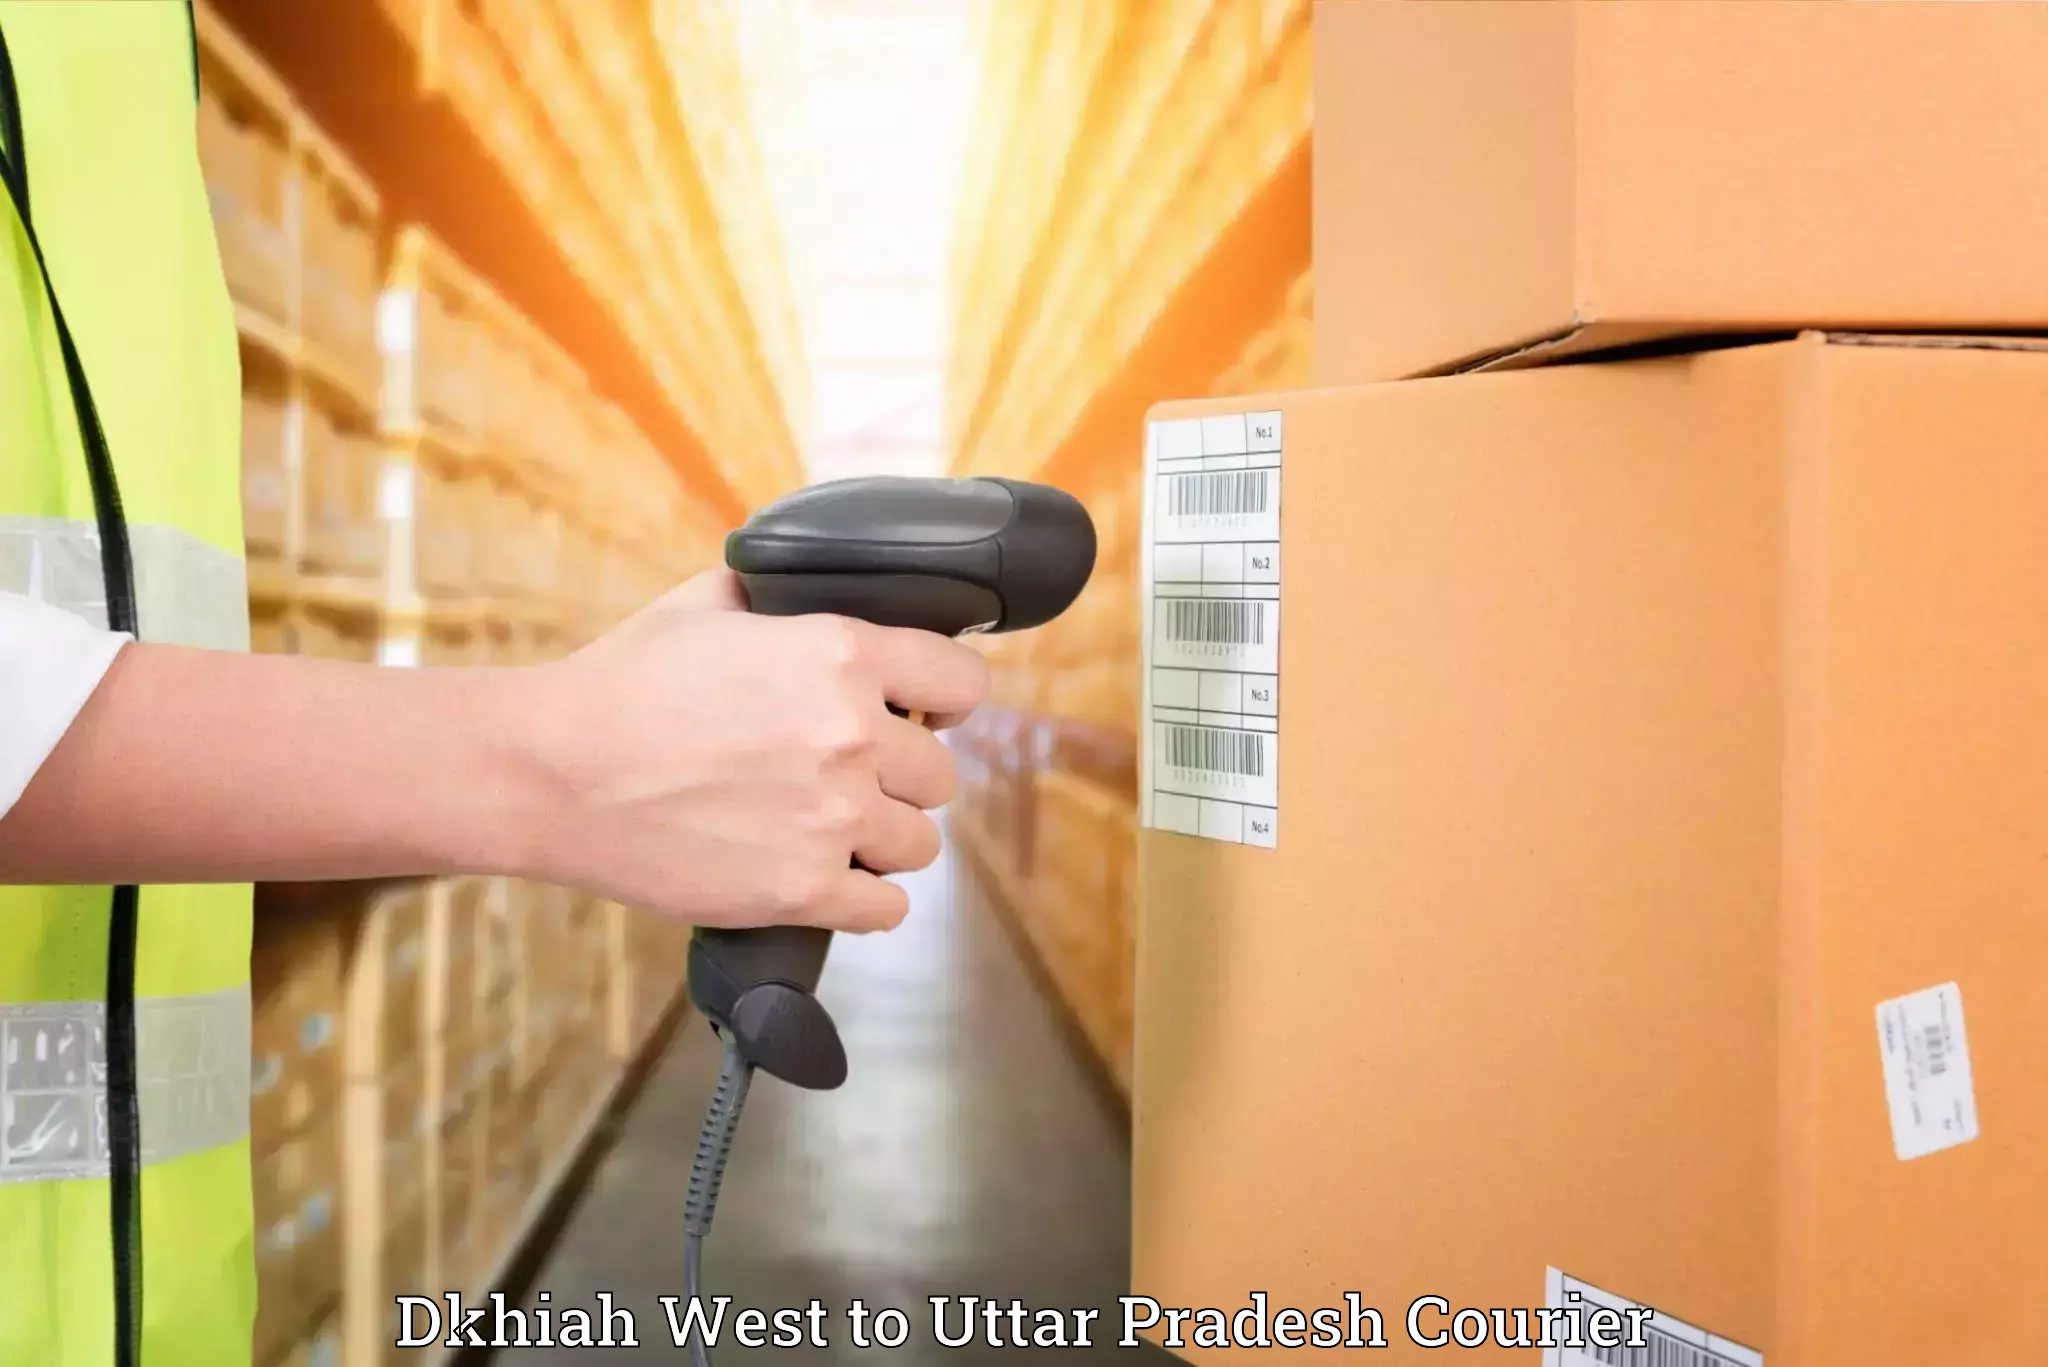 Customized moving experience Dkhiah West to Agra